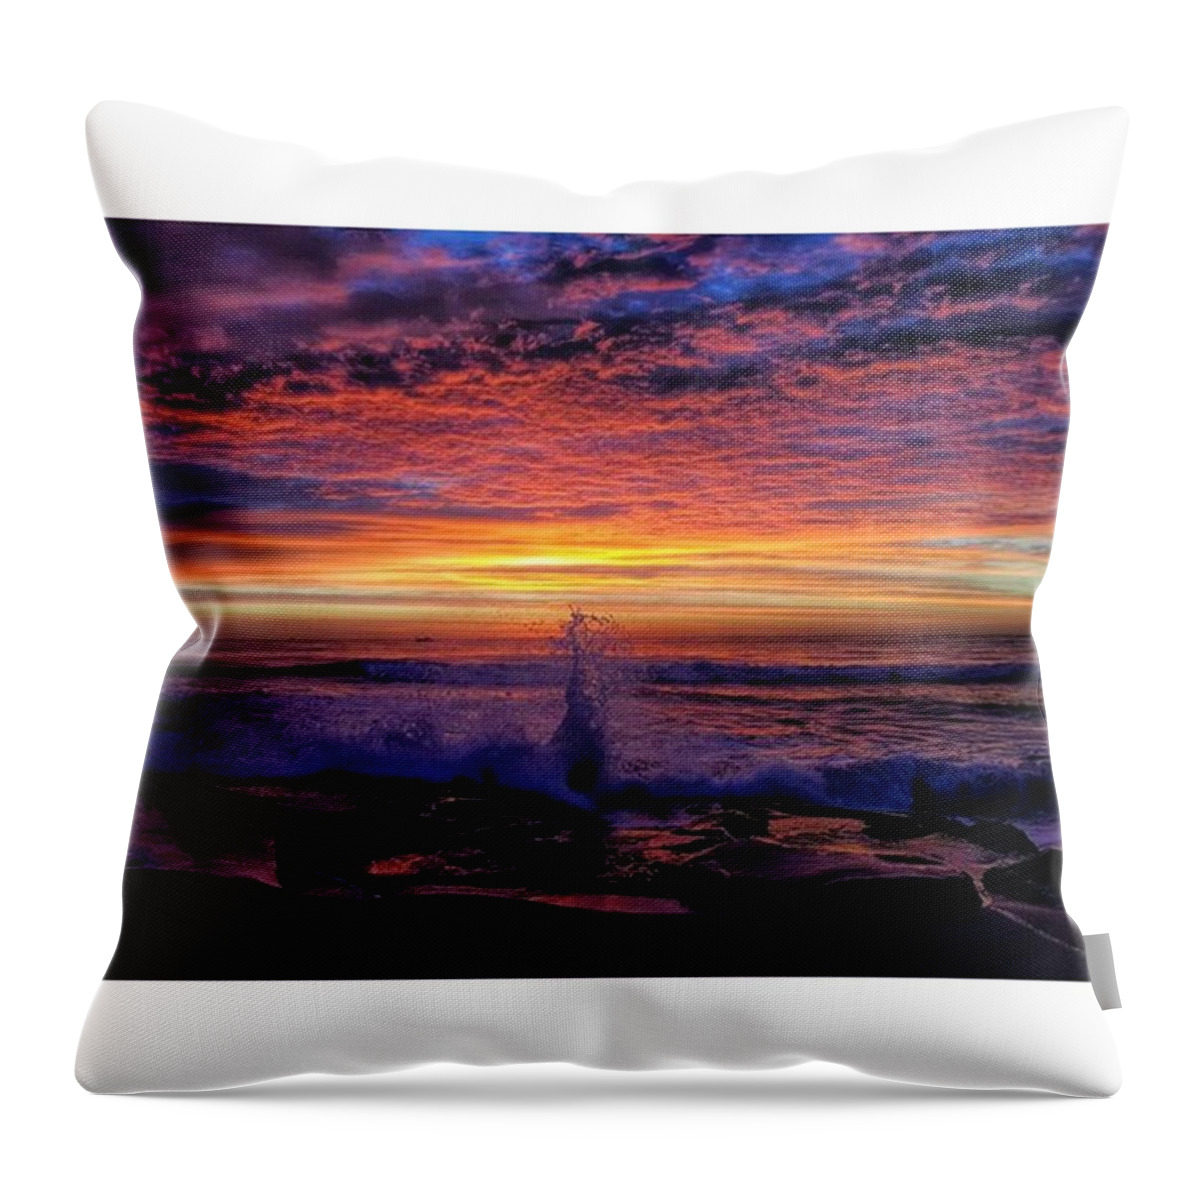 Reflection Throw Pillow featuring the photograph Here Comes The Sun by Lauren Fitzpatrick